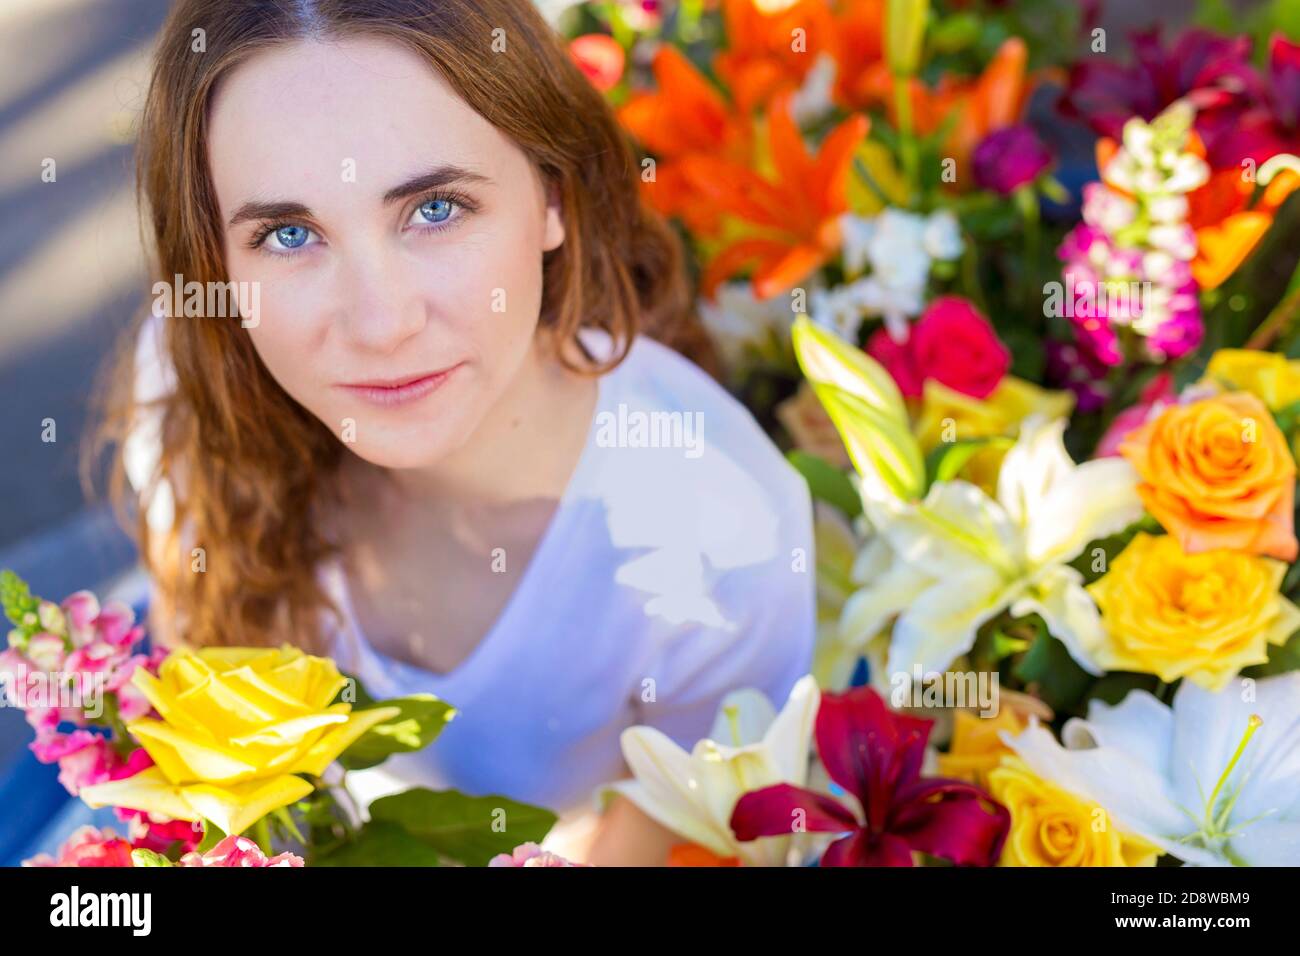 Closeup of beautiful serene young woman with calm expression in a white shirt  surrounded by abundant colorful florist flowers Stock Photo